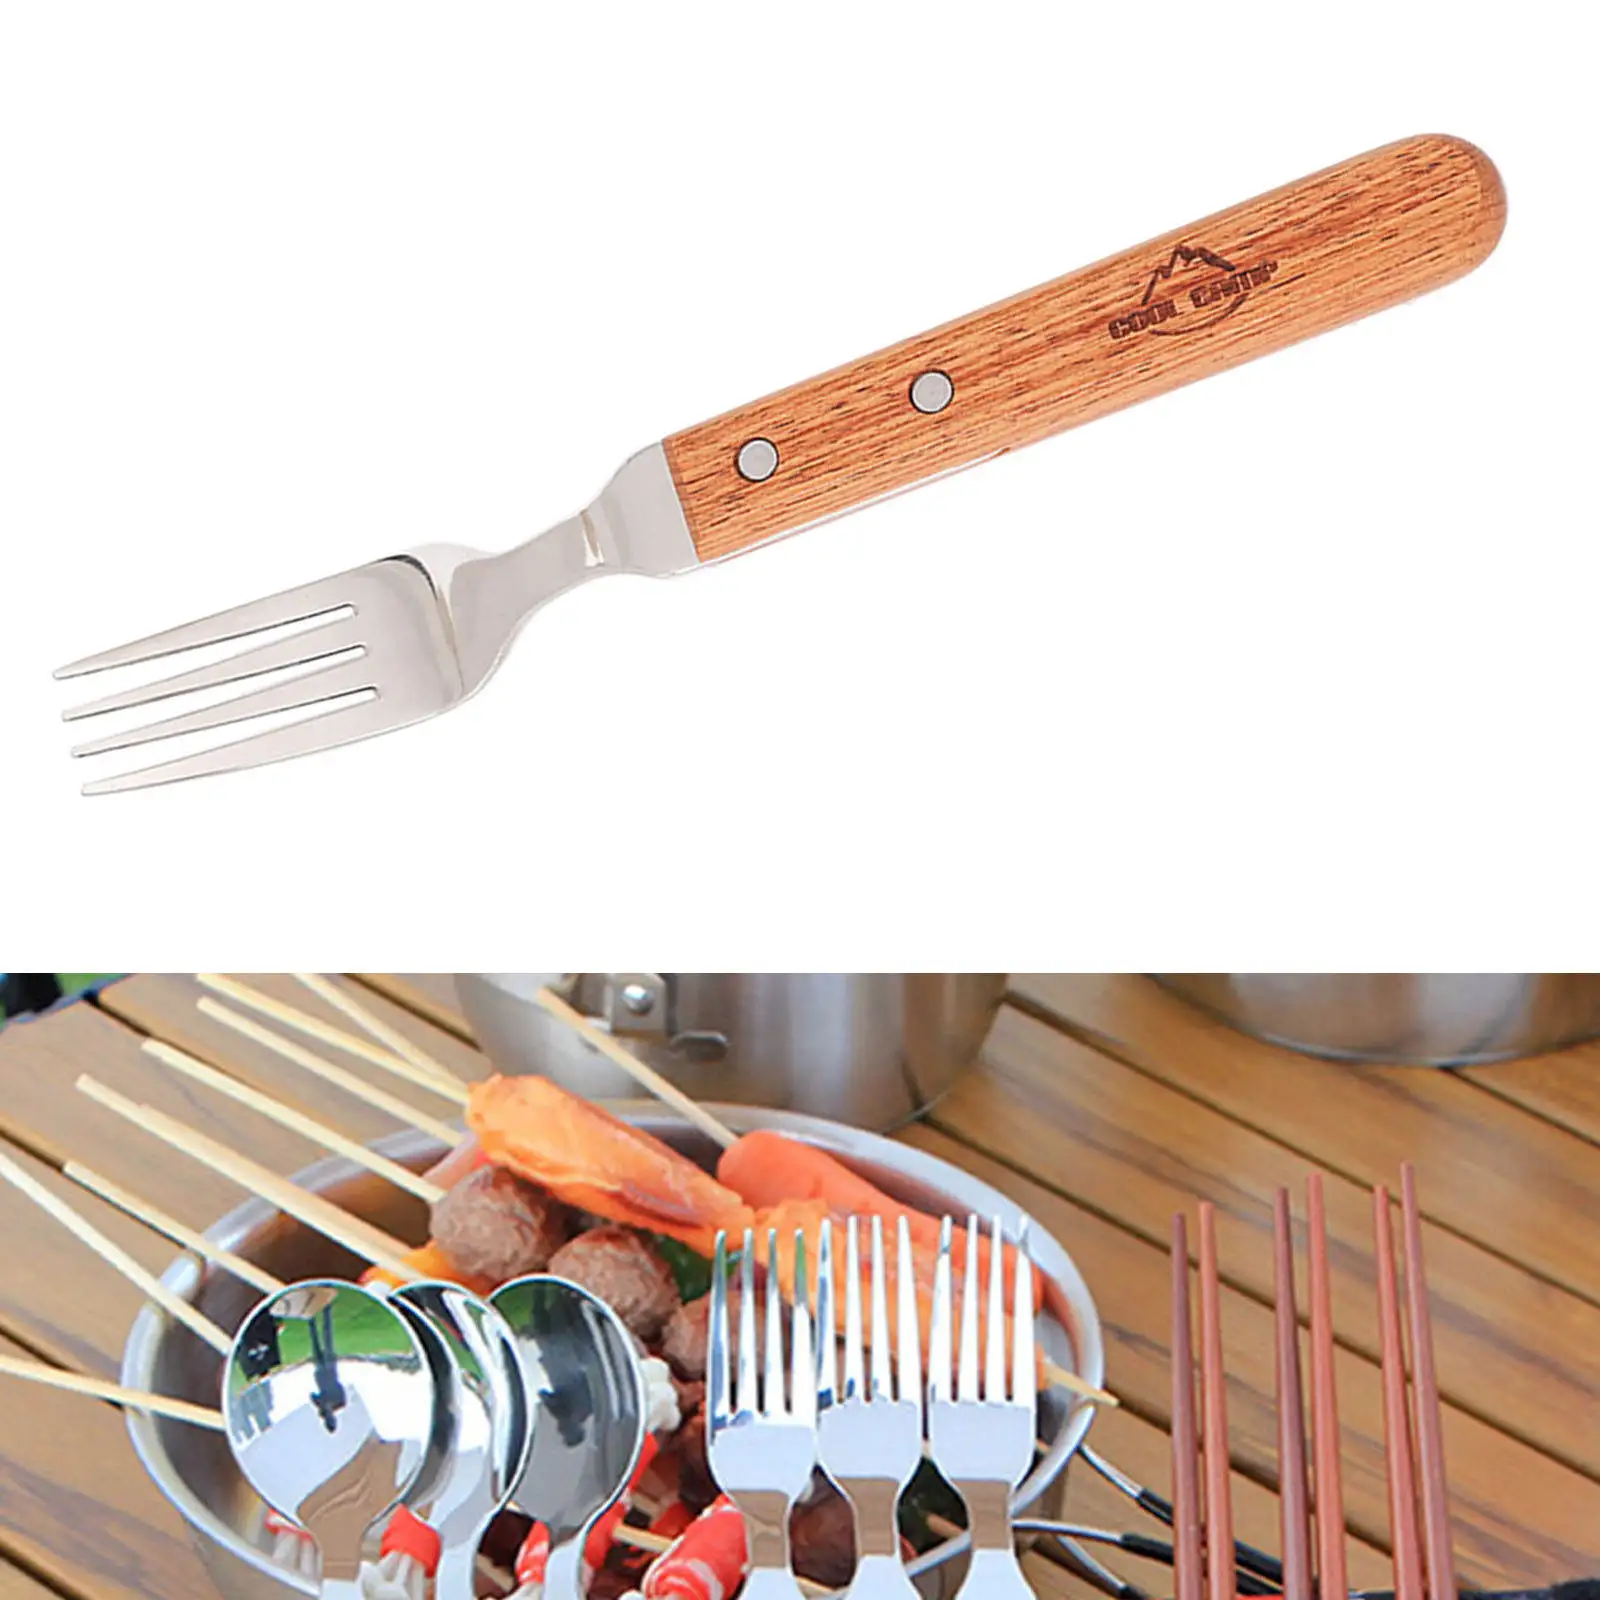 Lightweight Outdoor Camping Tableware Cutlery Cookware Backpacking Dinner Picnic Single Flatware Wood Utensils for Adults Kids